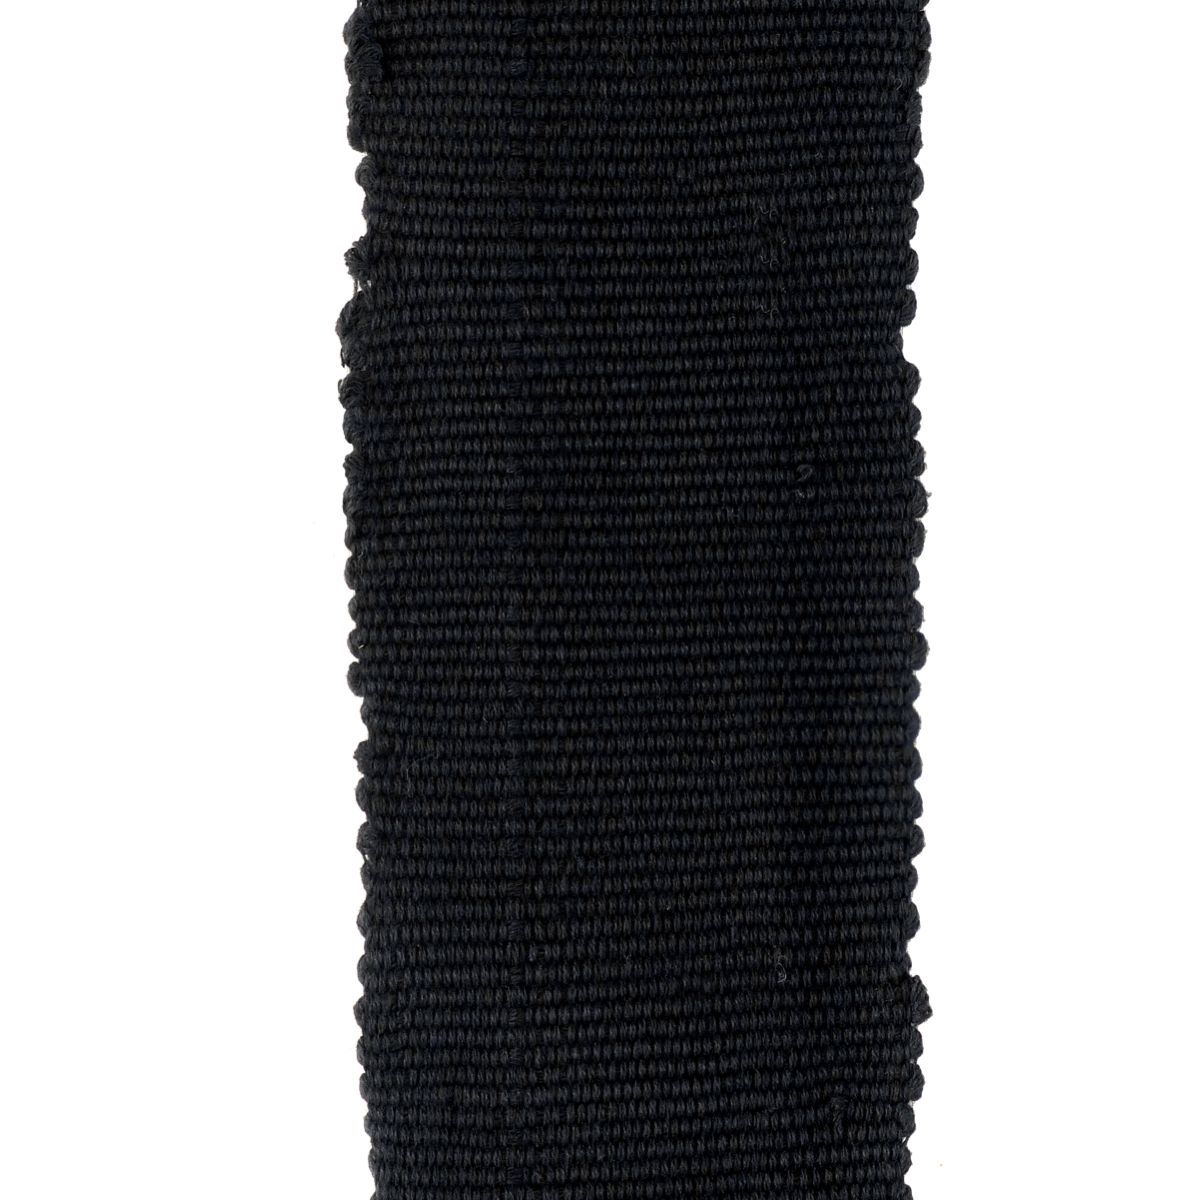 Handwoven Strip Cloth Pure Black Strip Cloth | The African Fabric Shop